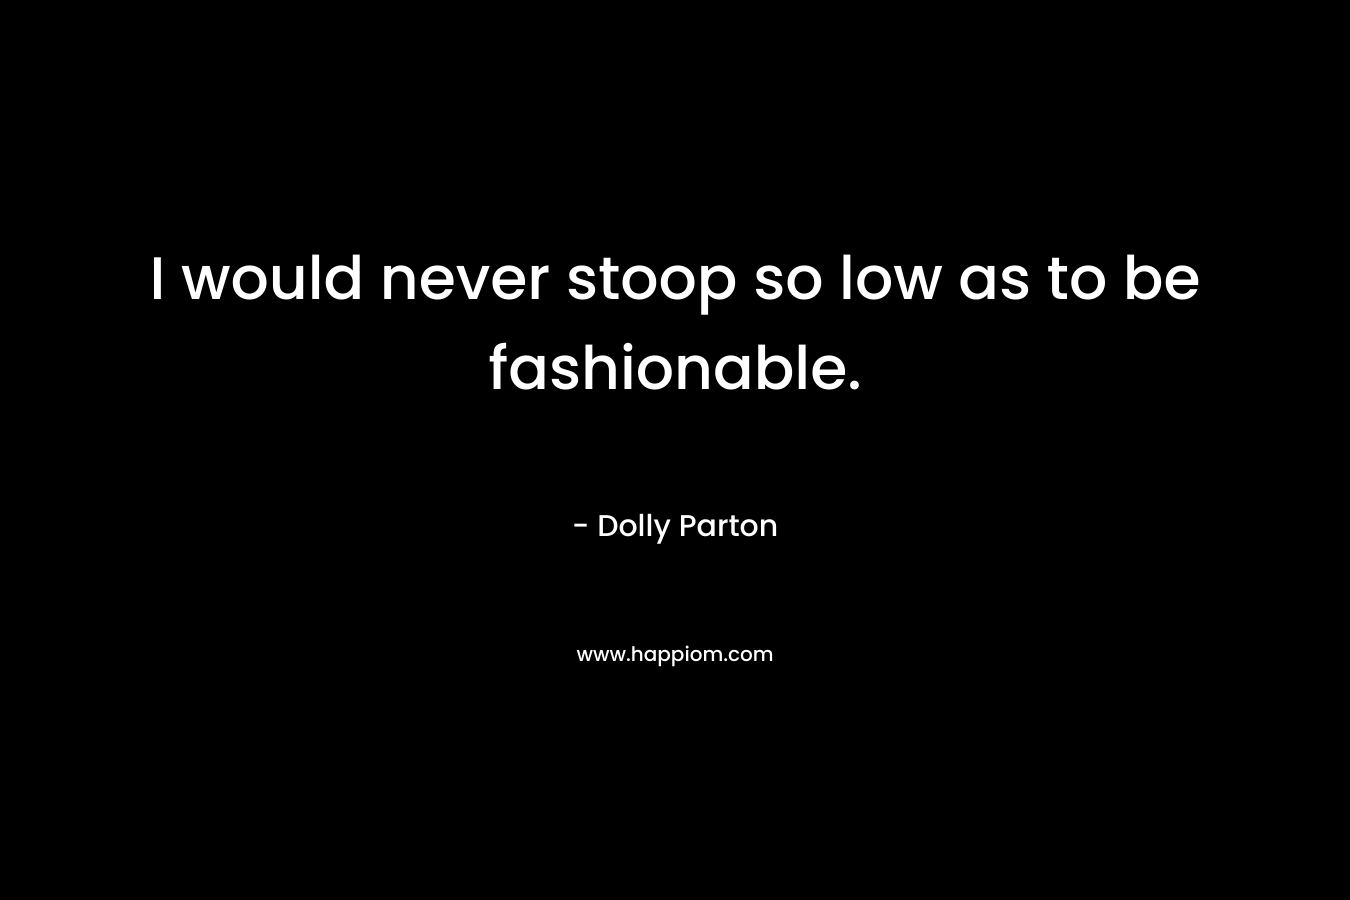 I would never stoop so low as to be fashionable. – Dolly Parton